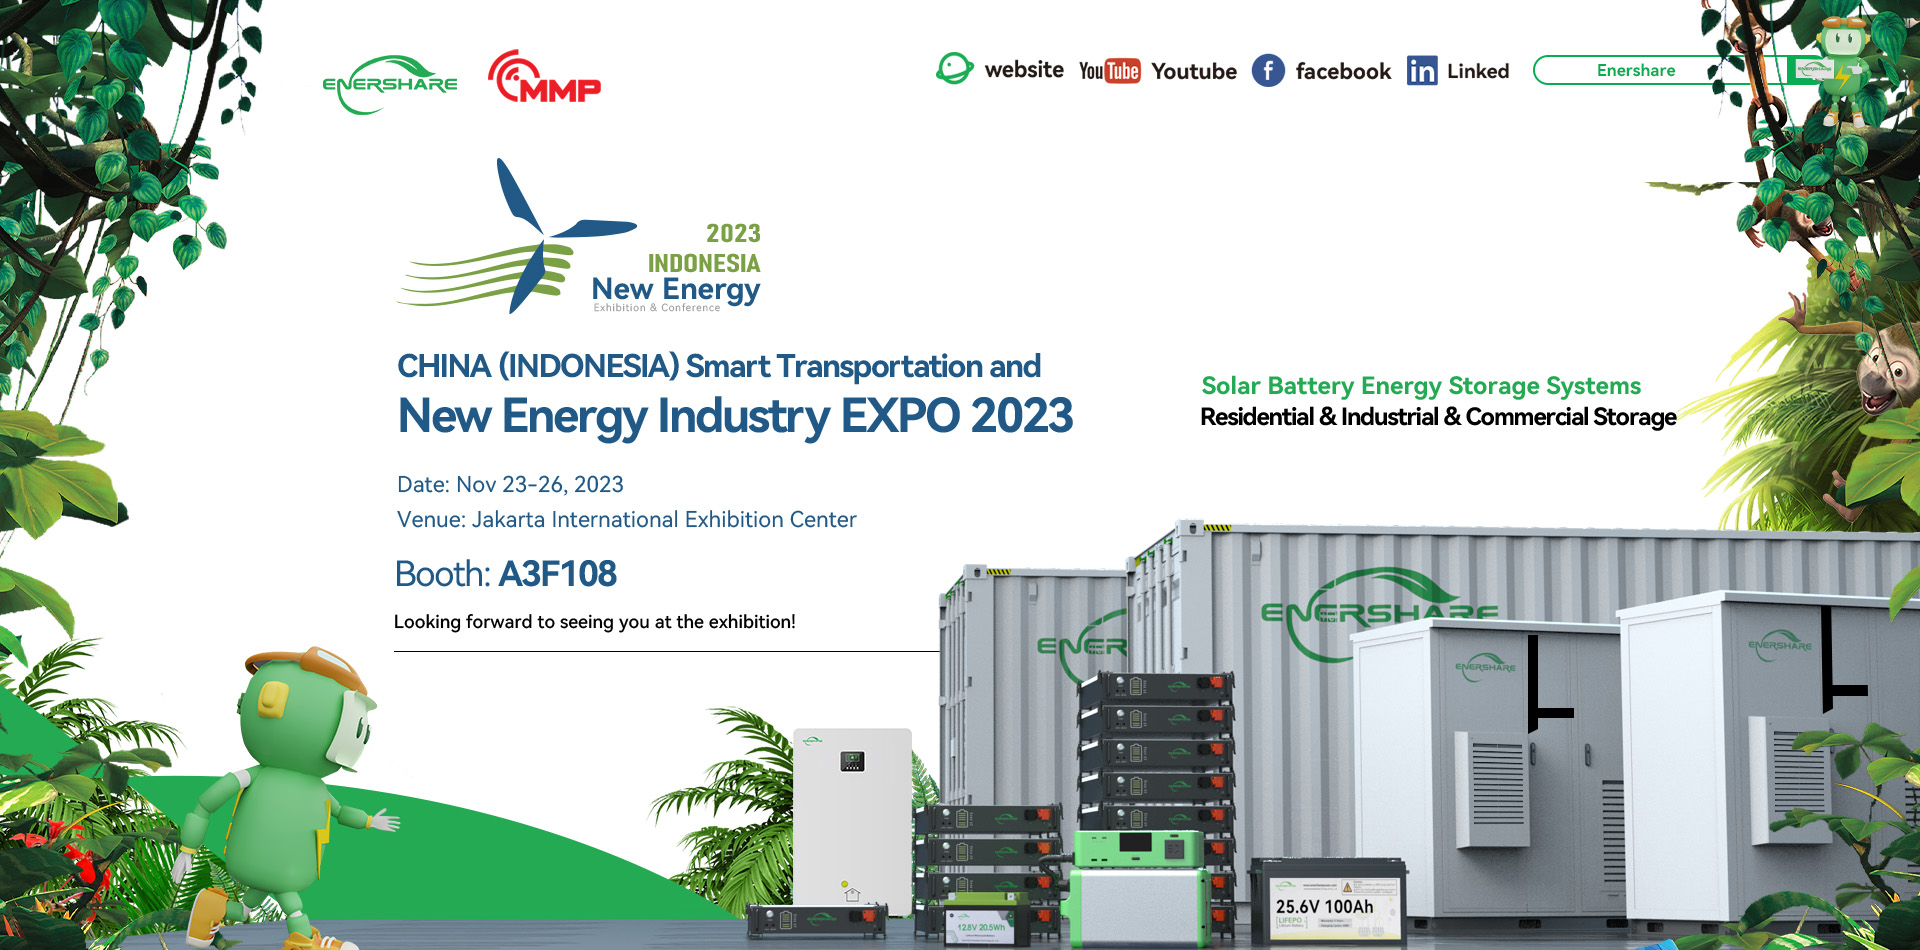 Enershare will appear at the CHINA (INDONESIA) Smart Transportation & New Energy Industry EXPO 2023!